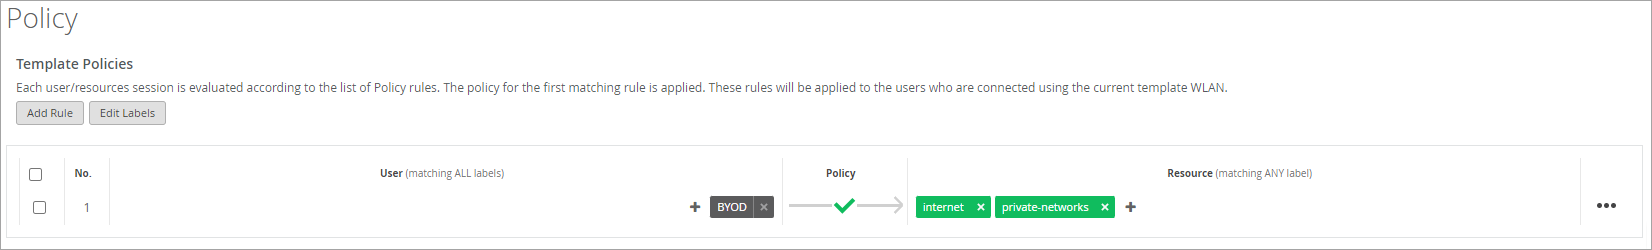 Sample Policy with BYOD User and Two Allowed Resources